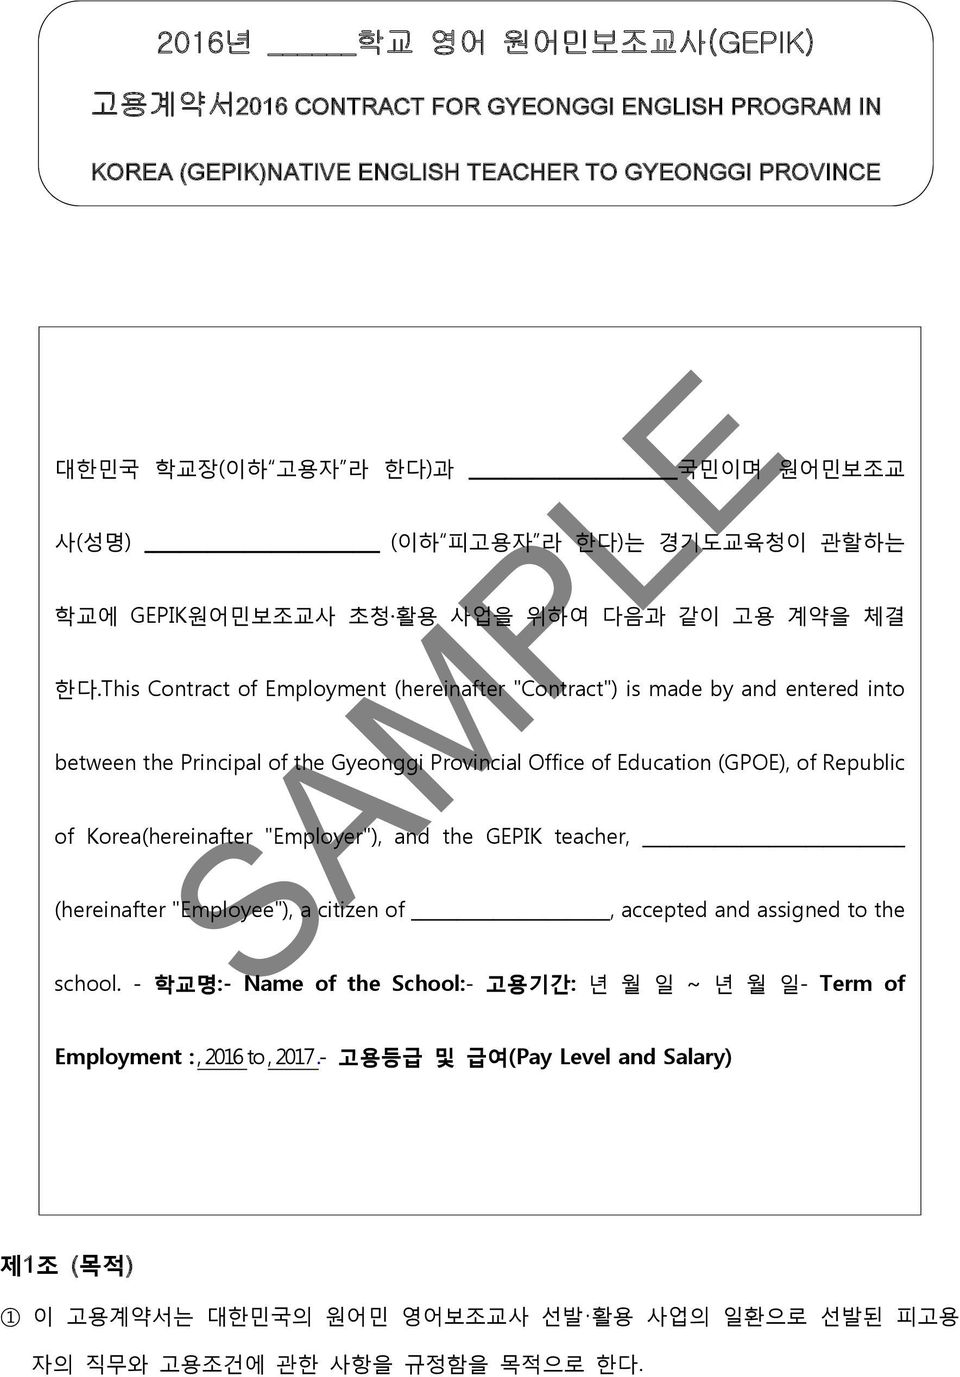 This Contract of Employment (hereinafter "Contract") is made by and entered into between the Principal of the Gyeonggi Provincial Office of Education (GPOE), of Republic of Korea(hereinafter